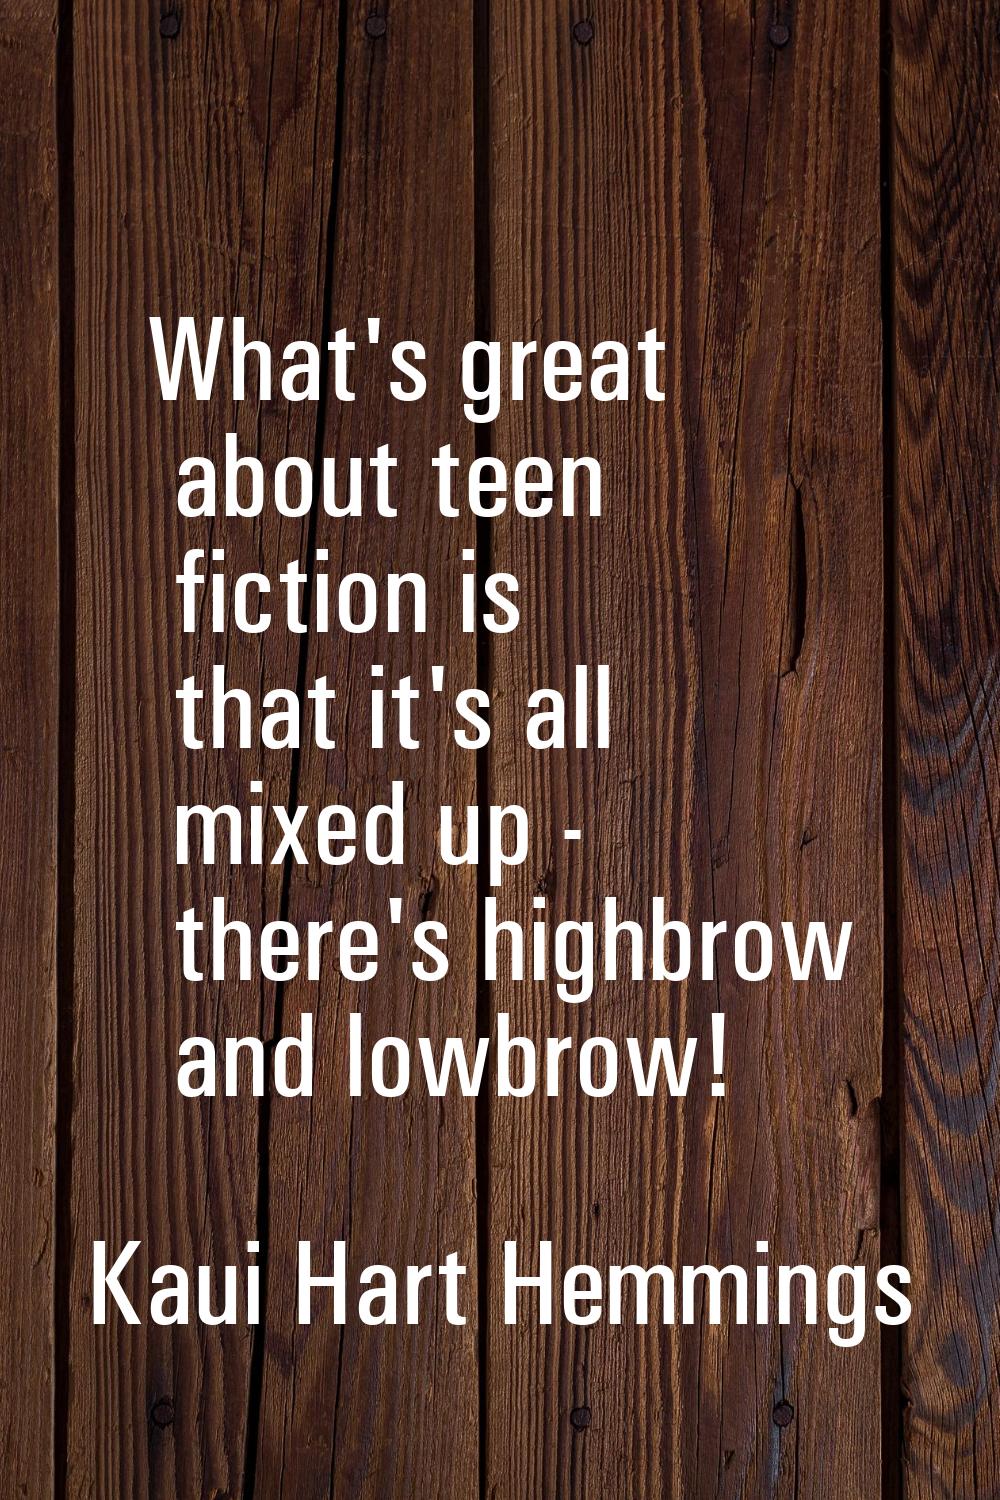 What's great about teen fiction is that it's all mixed up - there's highbrow and lowbrow!